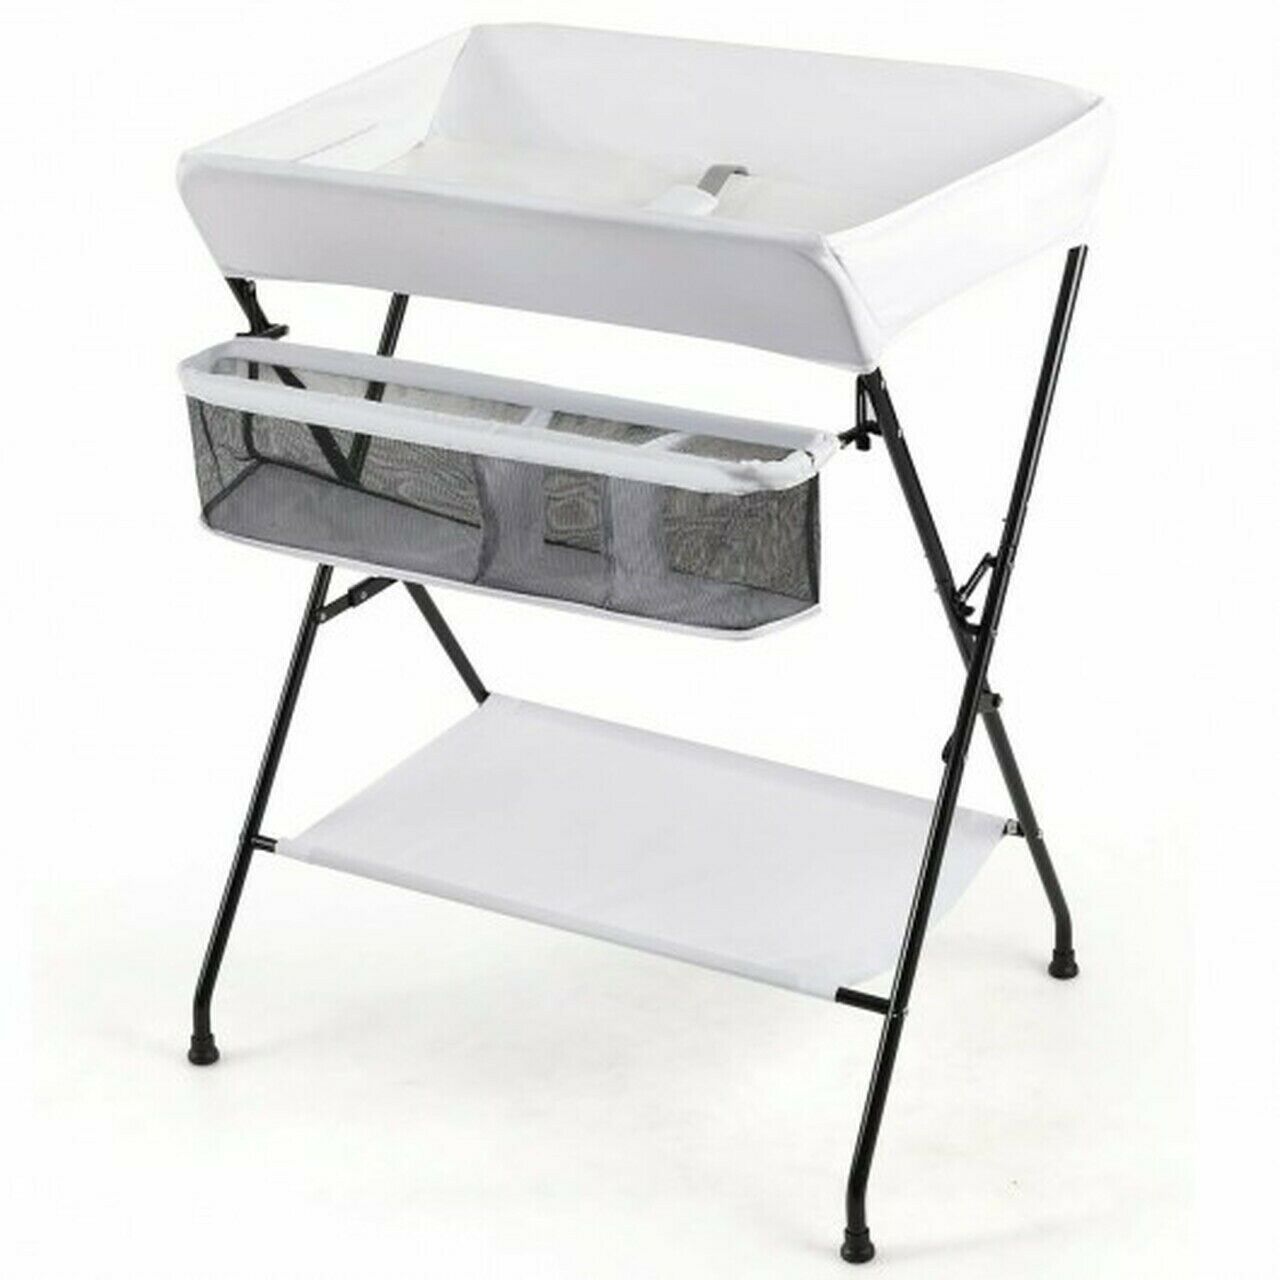 "bb5402wh" Portable Infant Changing Station Baby Diaper Table With Safety Belt-w